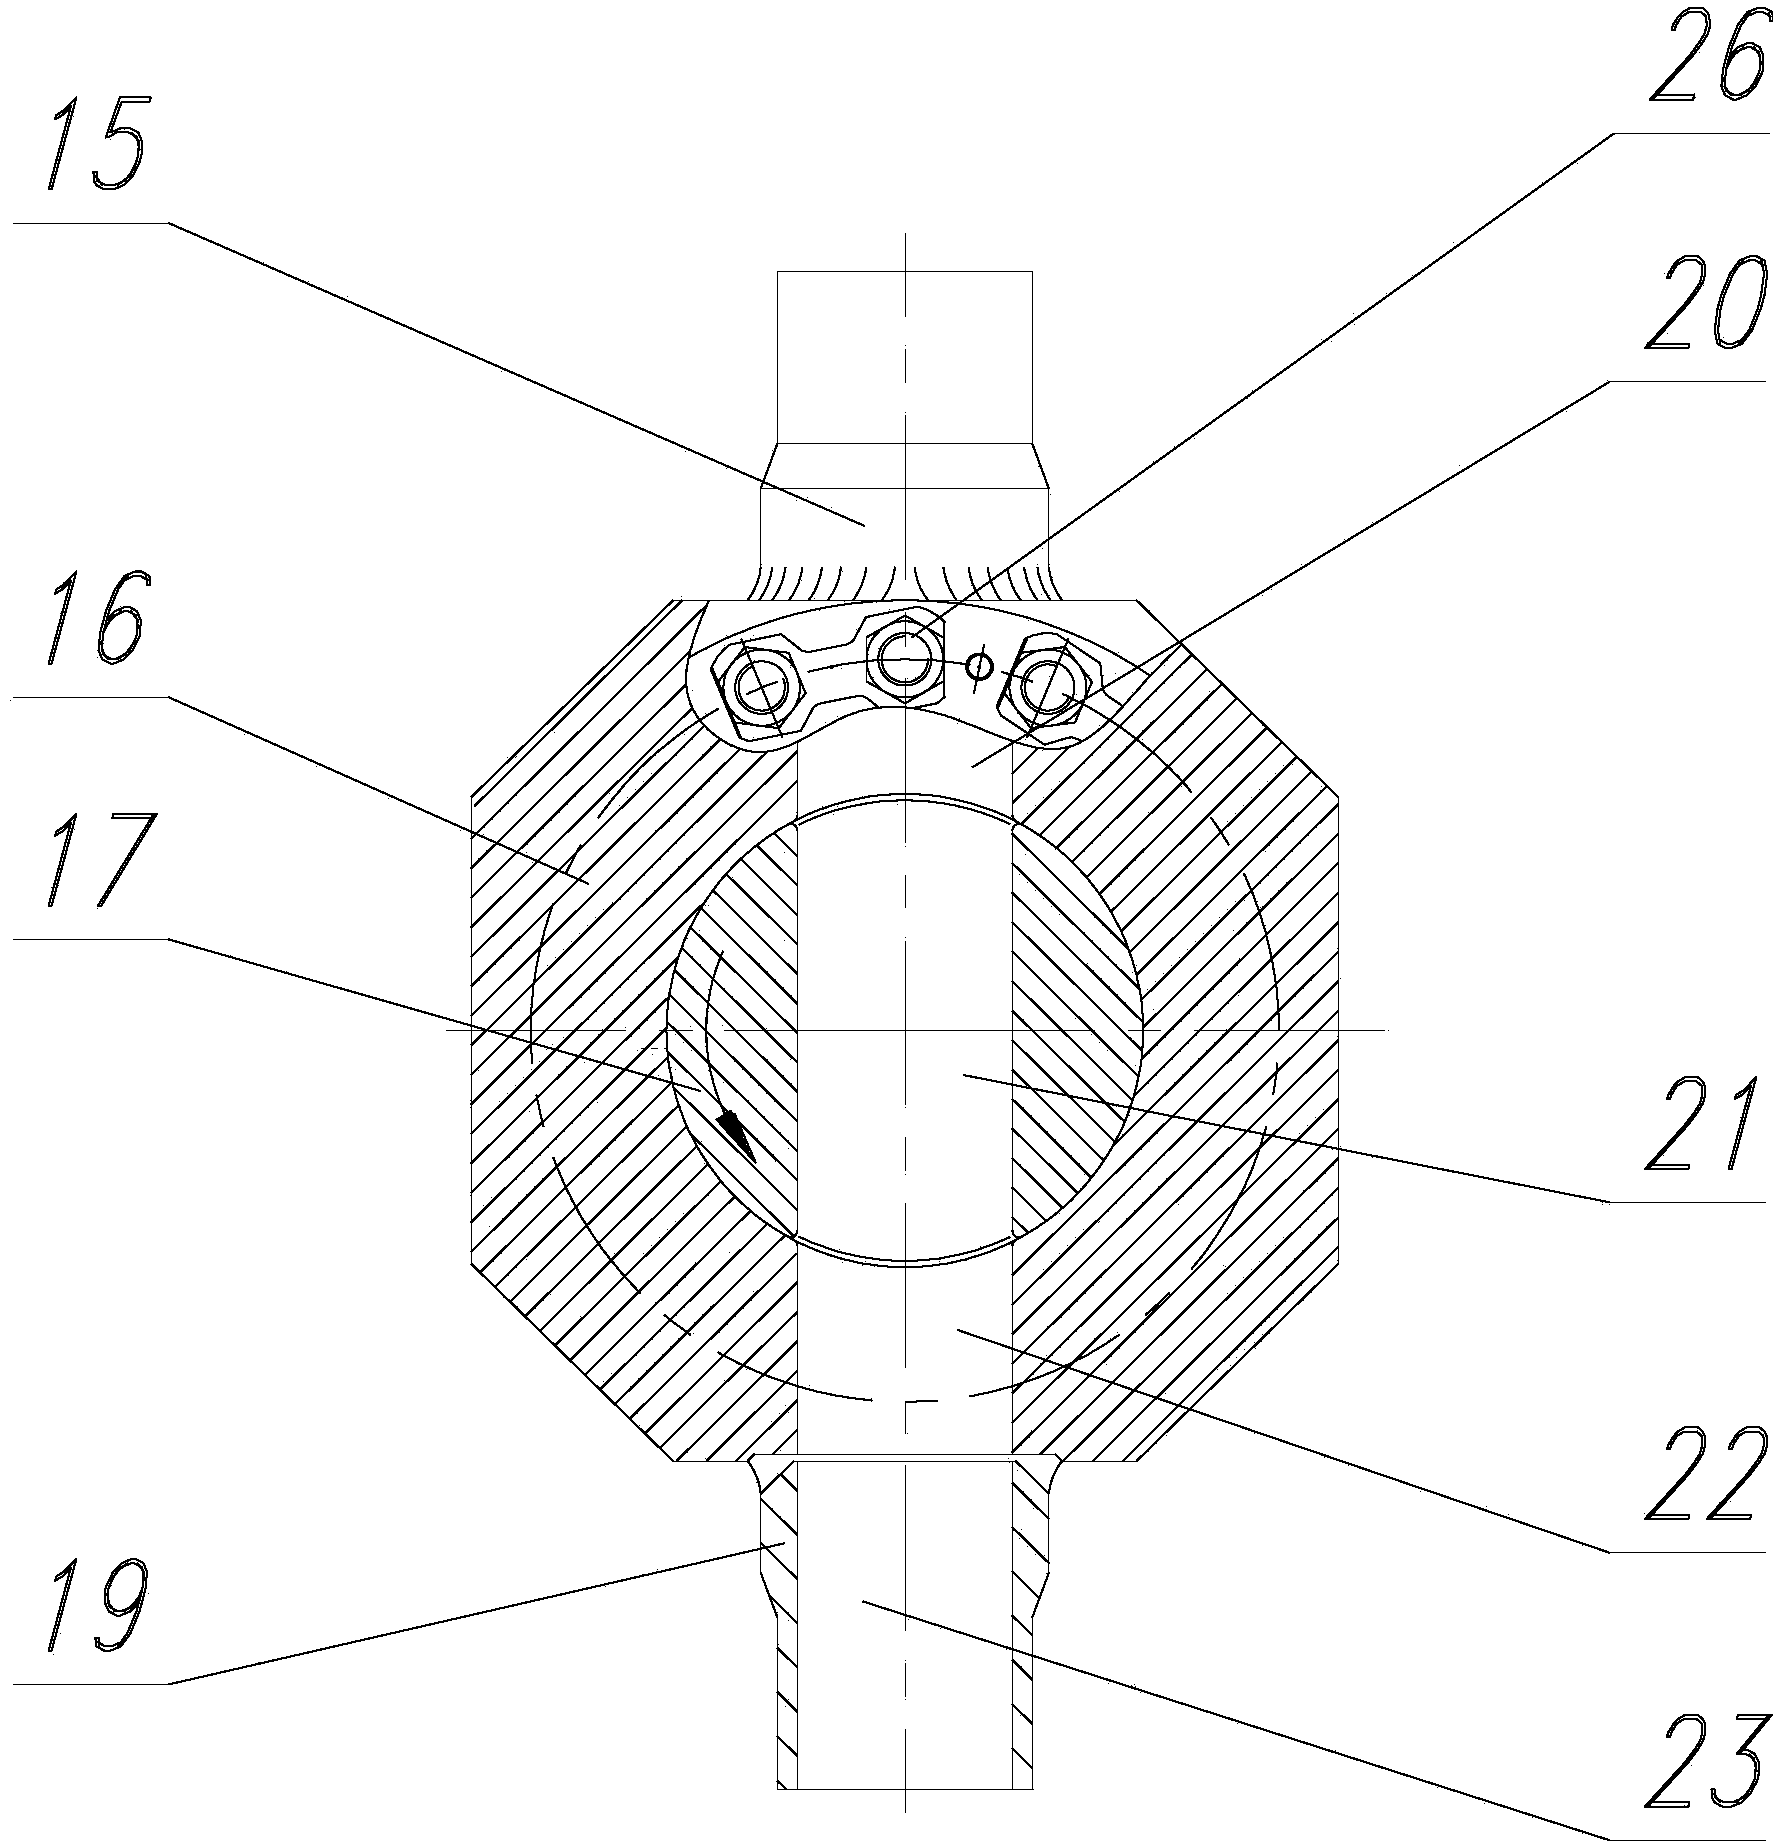 Ball stopper applied to high-temperature gas-cooled reactor